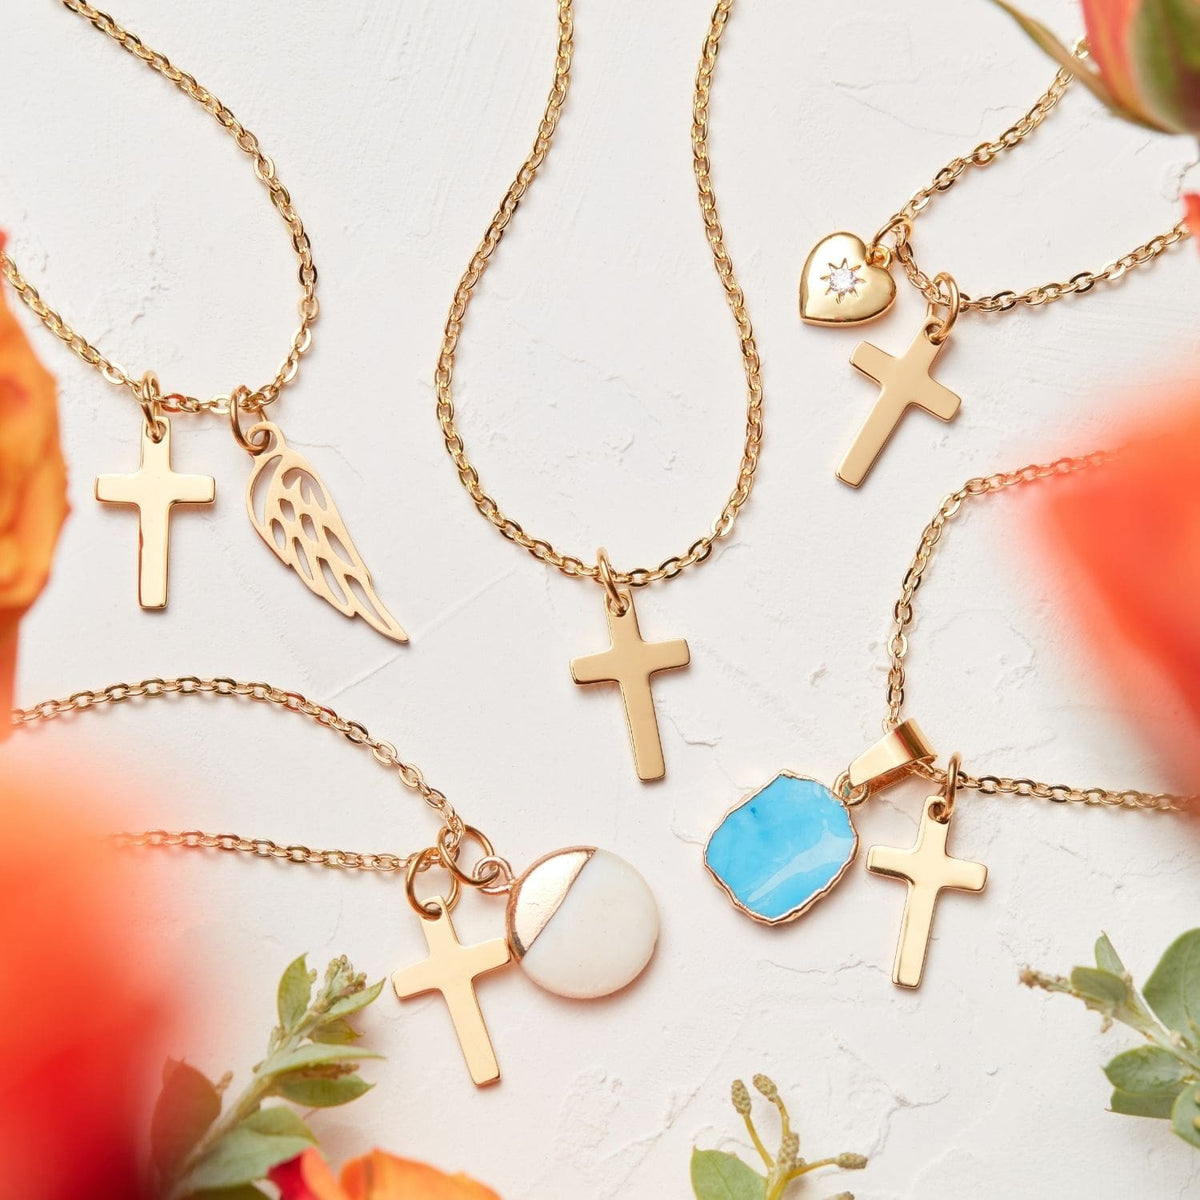 To My Unbiological Sister | So Glad God Brought You | Cross Necklace